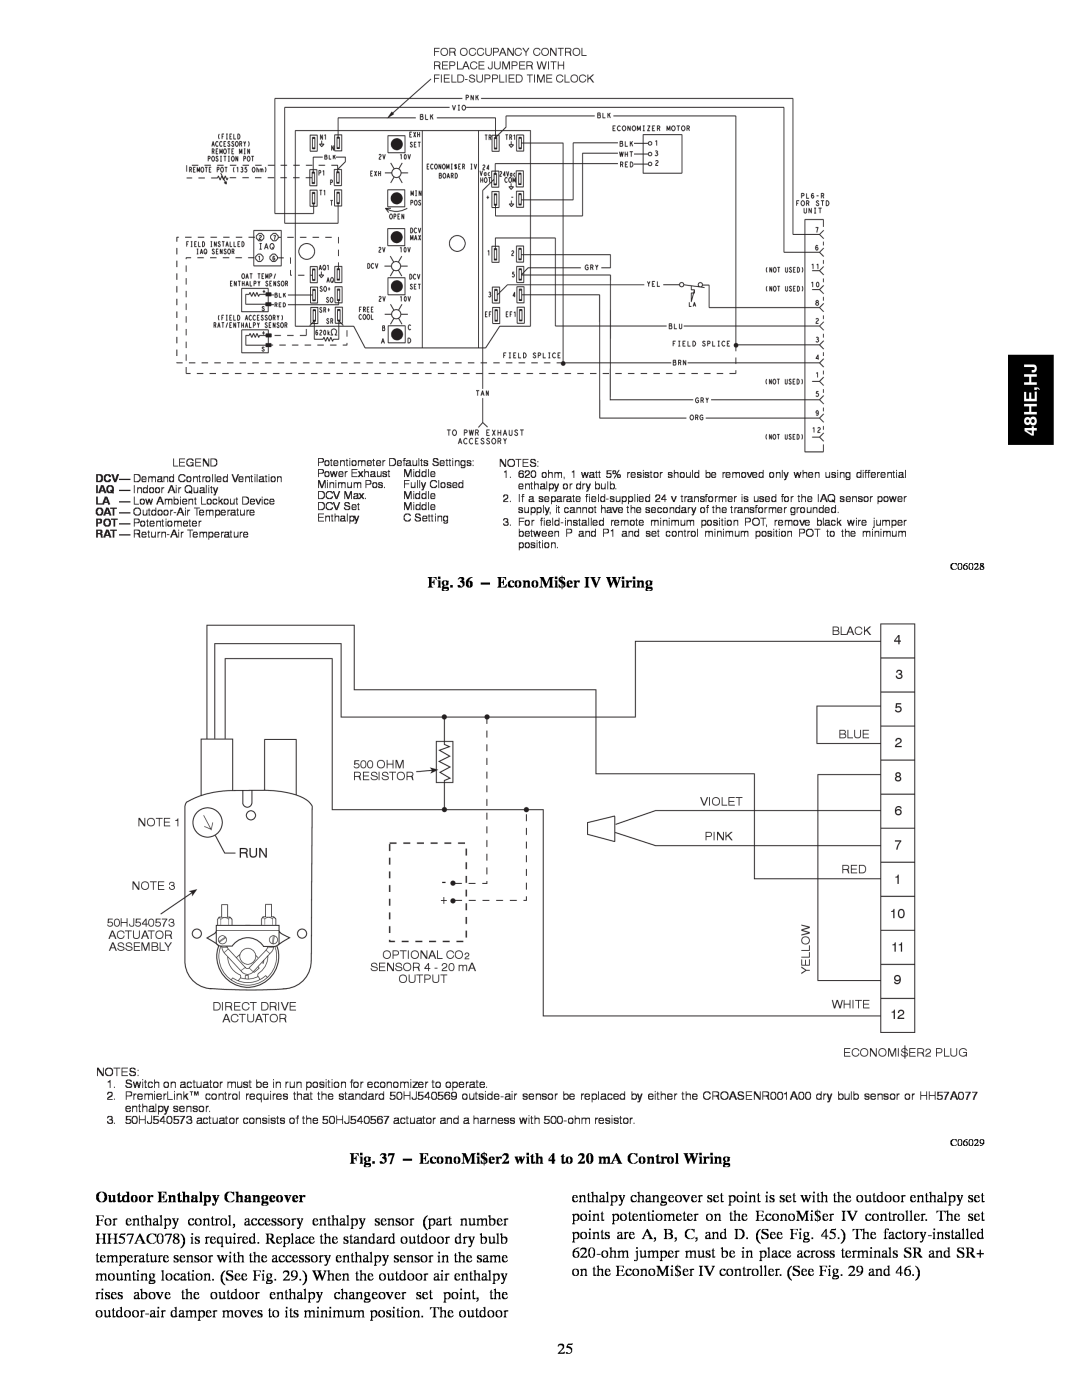 Carrier 48HJ004---007, 48HE003---006 installation instructions 48HE,HJ, EconoMi$er IV Wiring, Outdoor Enthalpy Changeover 